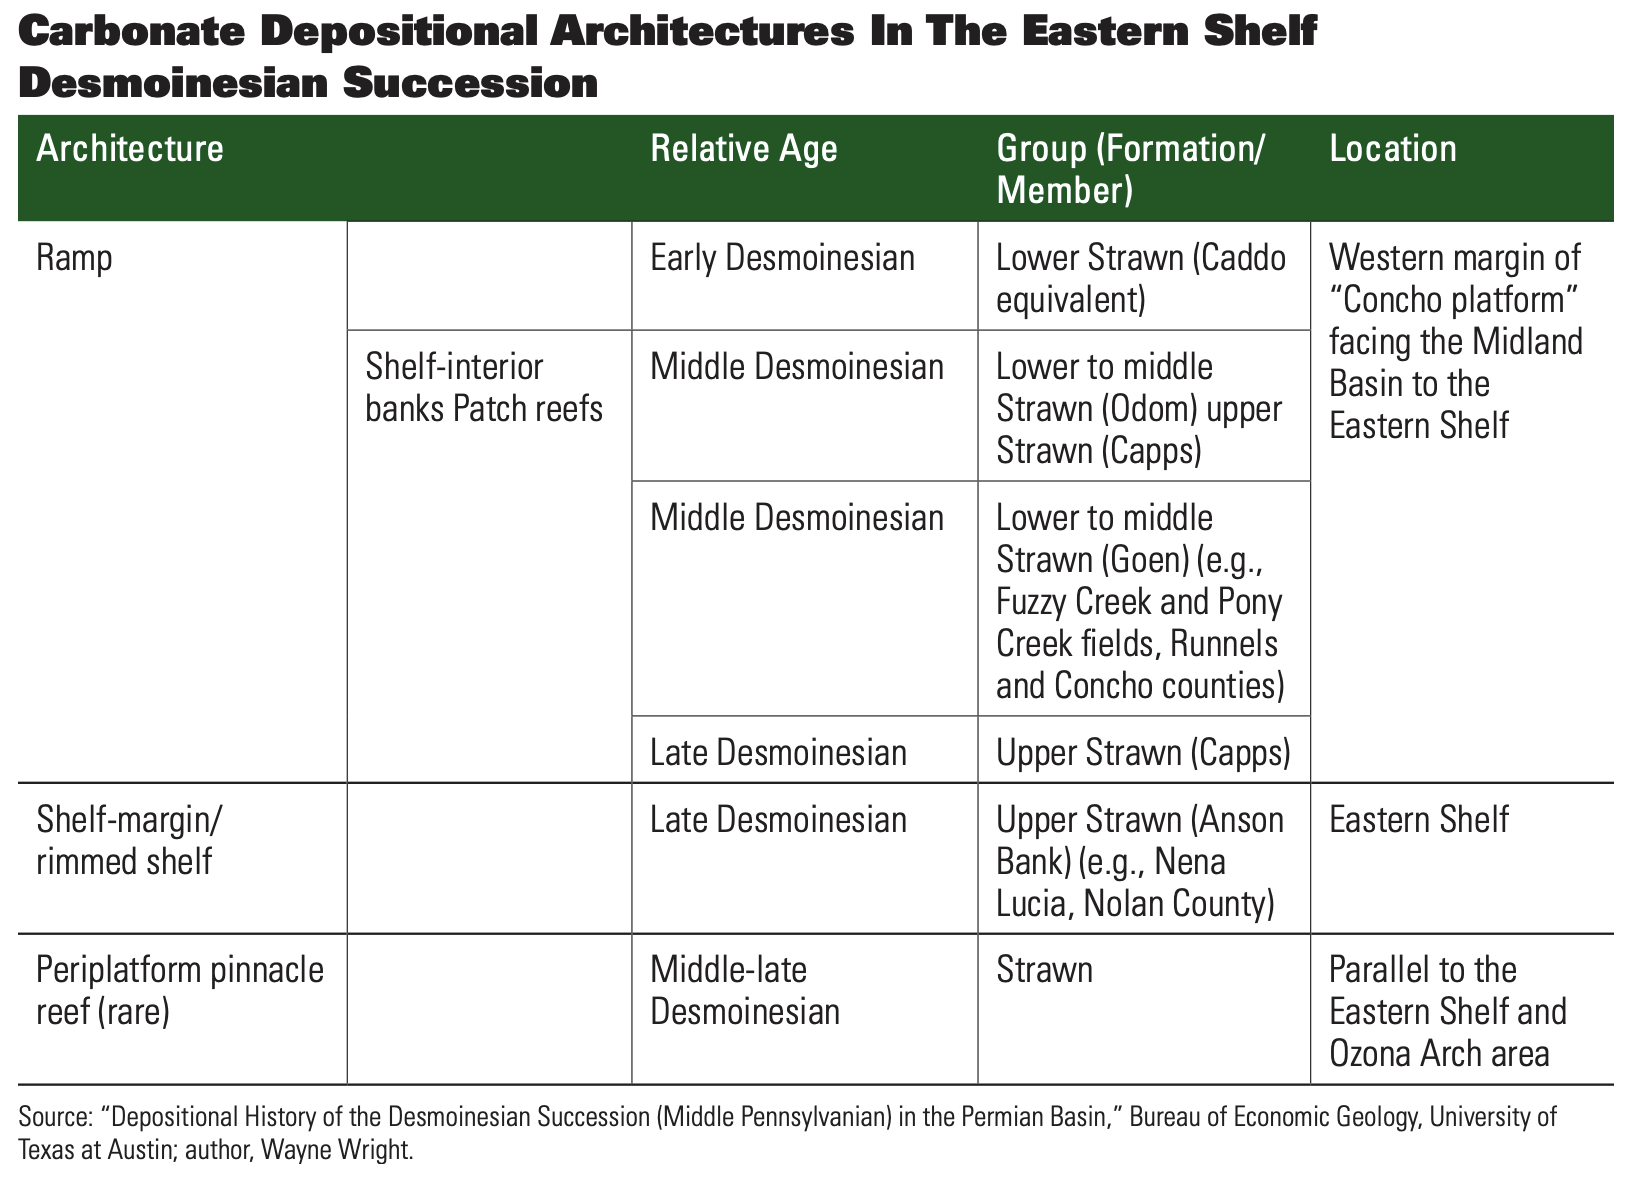 Carbonate Depositional Architectures In The Eastern Shelf Desmoinesian Succession Chart